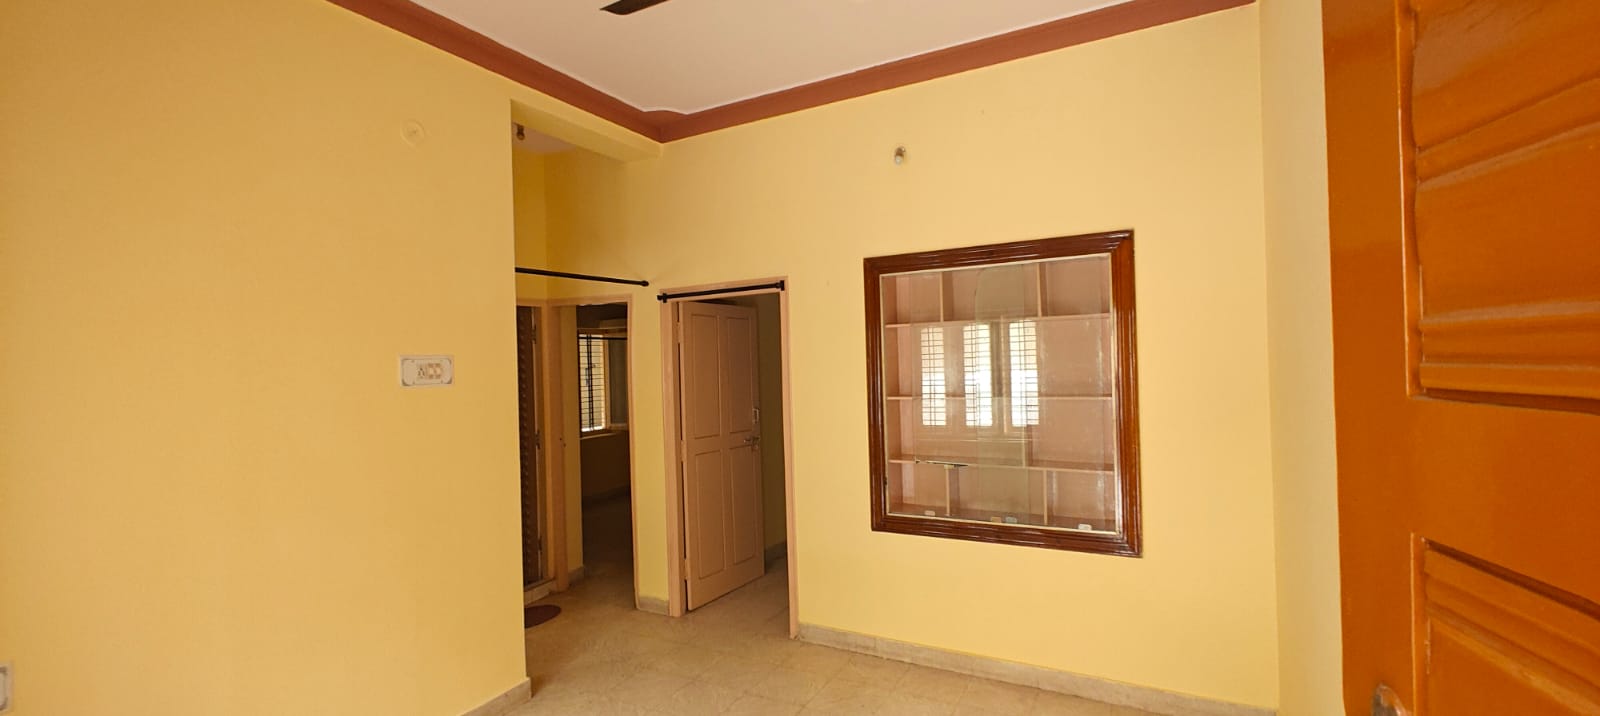 1 BHK Independent House for Lease Only at JAML2 - 3449 in HSR Layout 5th Sector